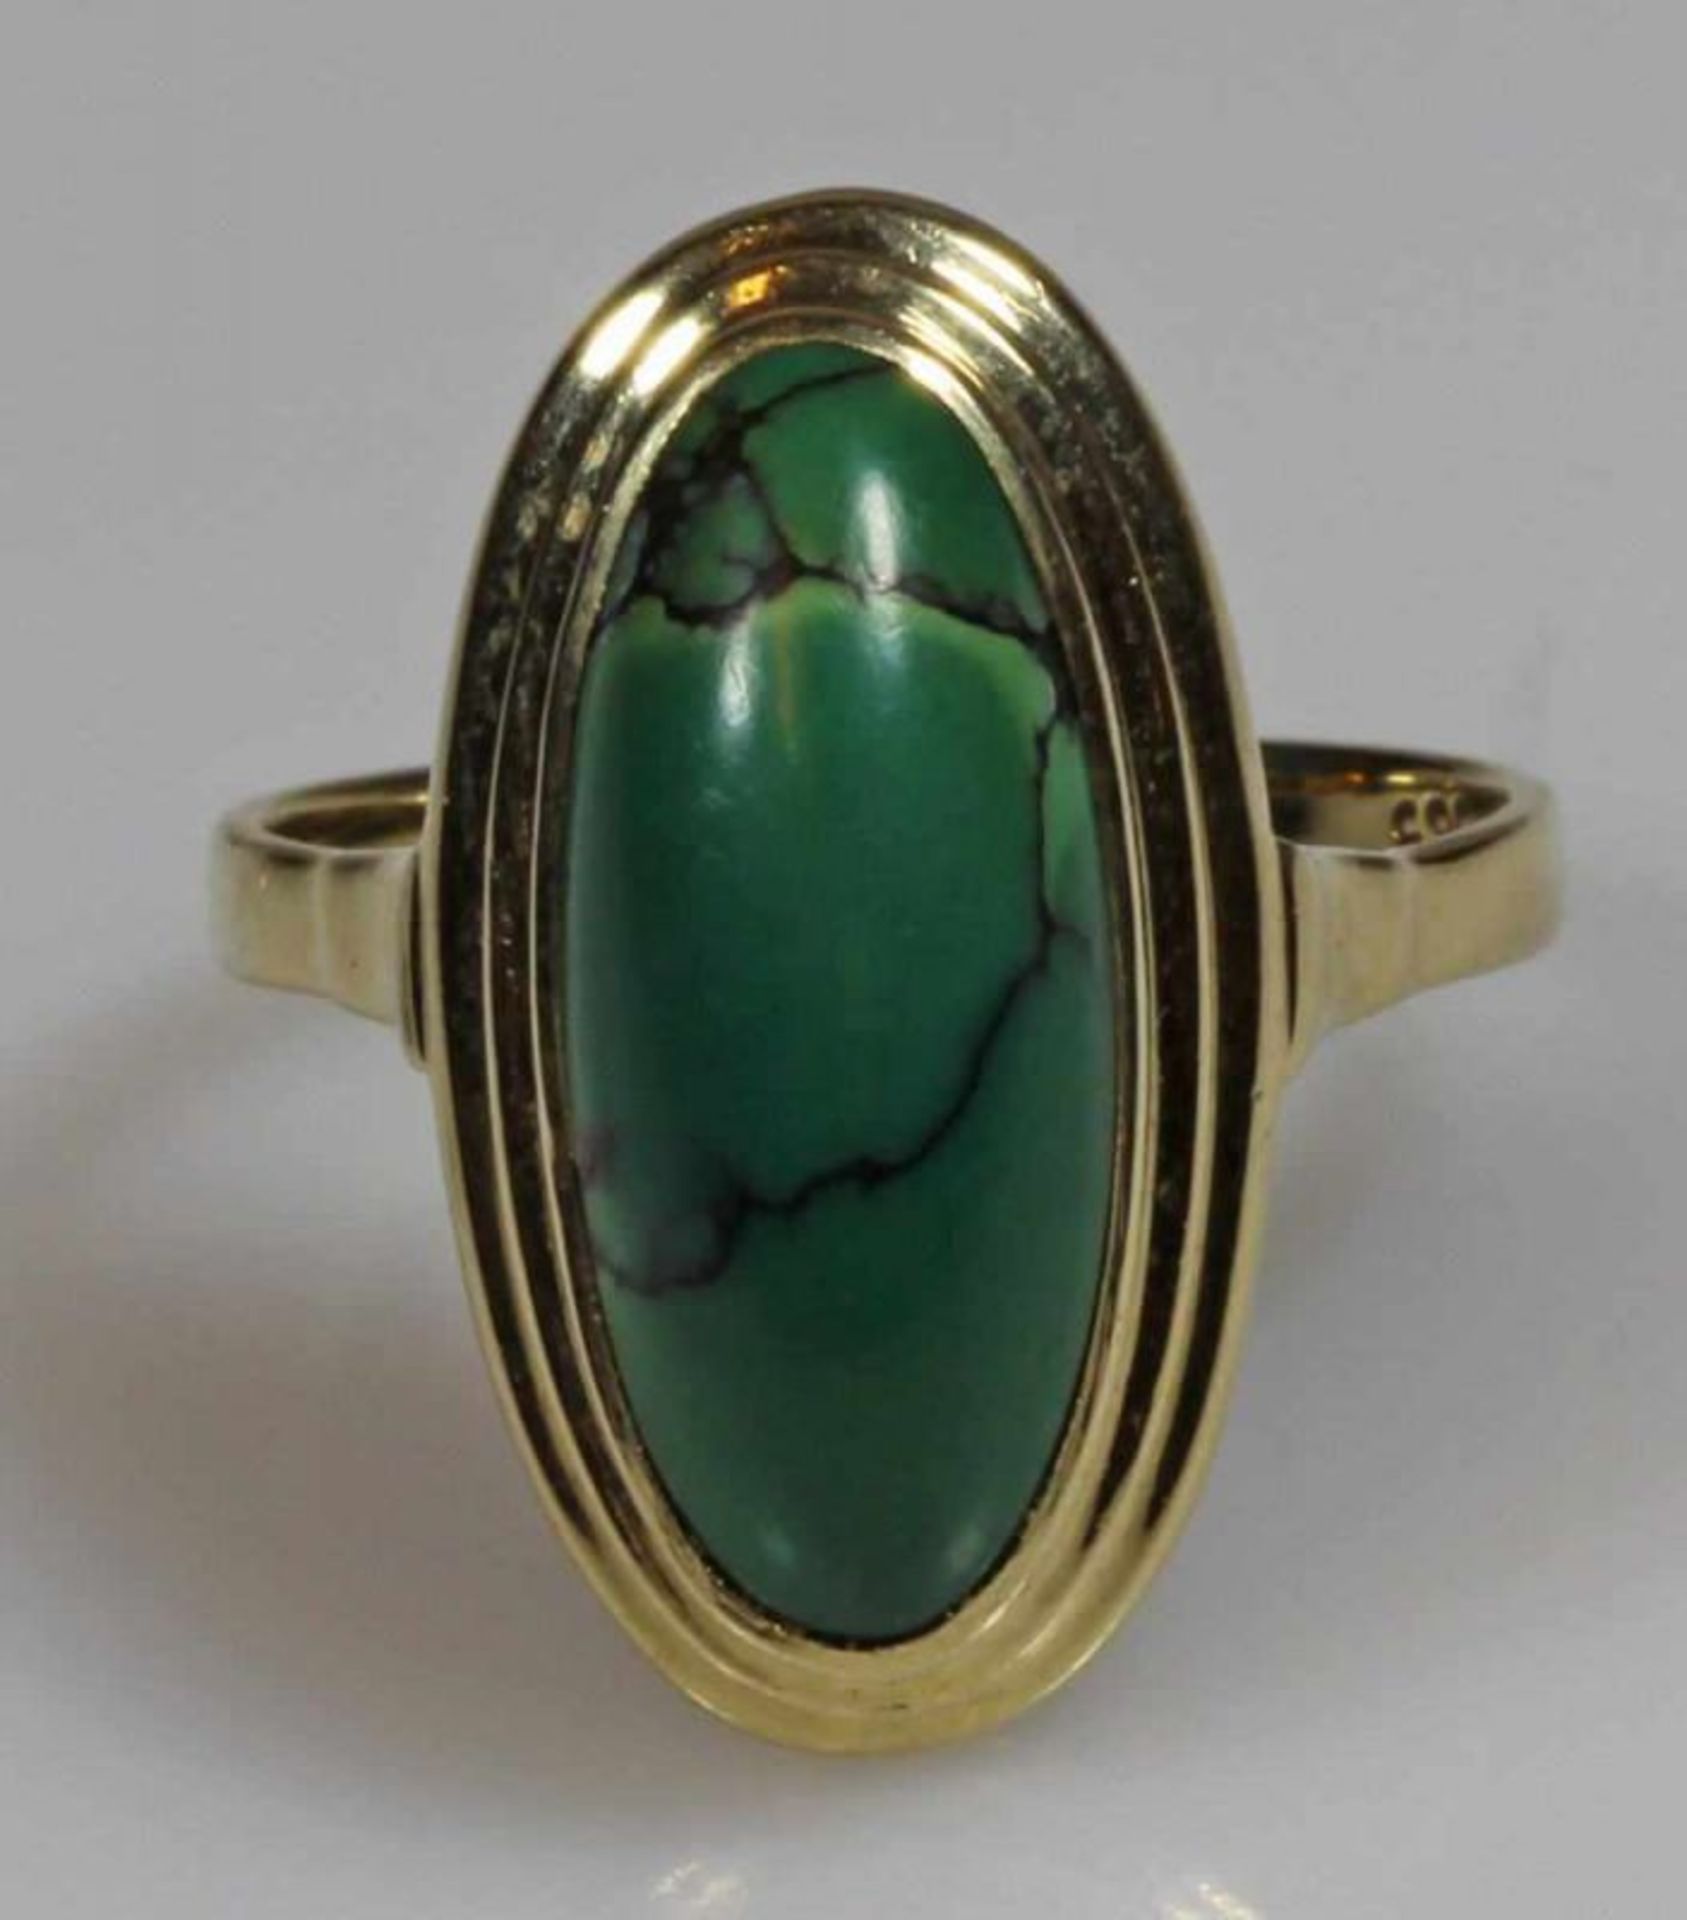 Ring, GG 585, 1 Malachit-Cabochon, 4 g, RM 17.5 20.00 % buyer's premium on the hammer price 19.